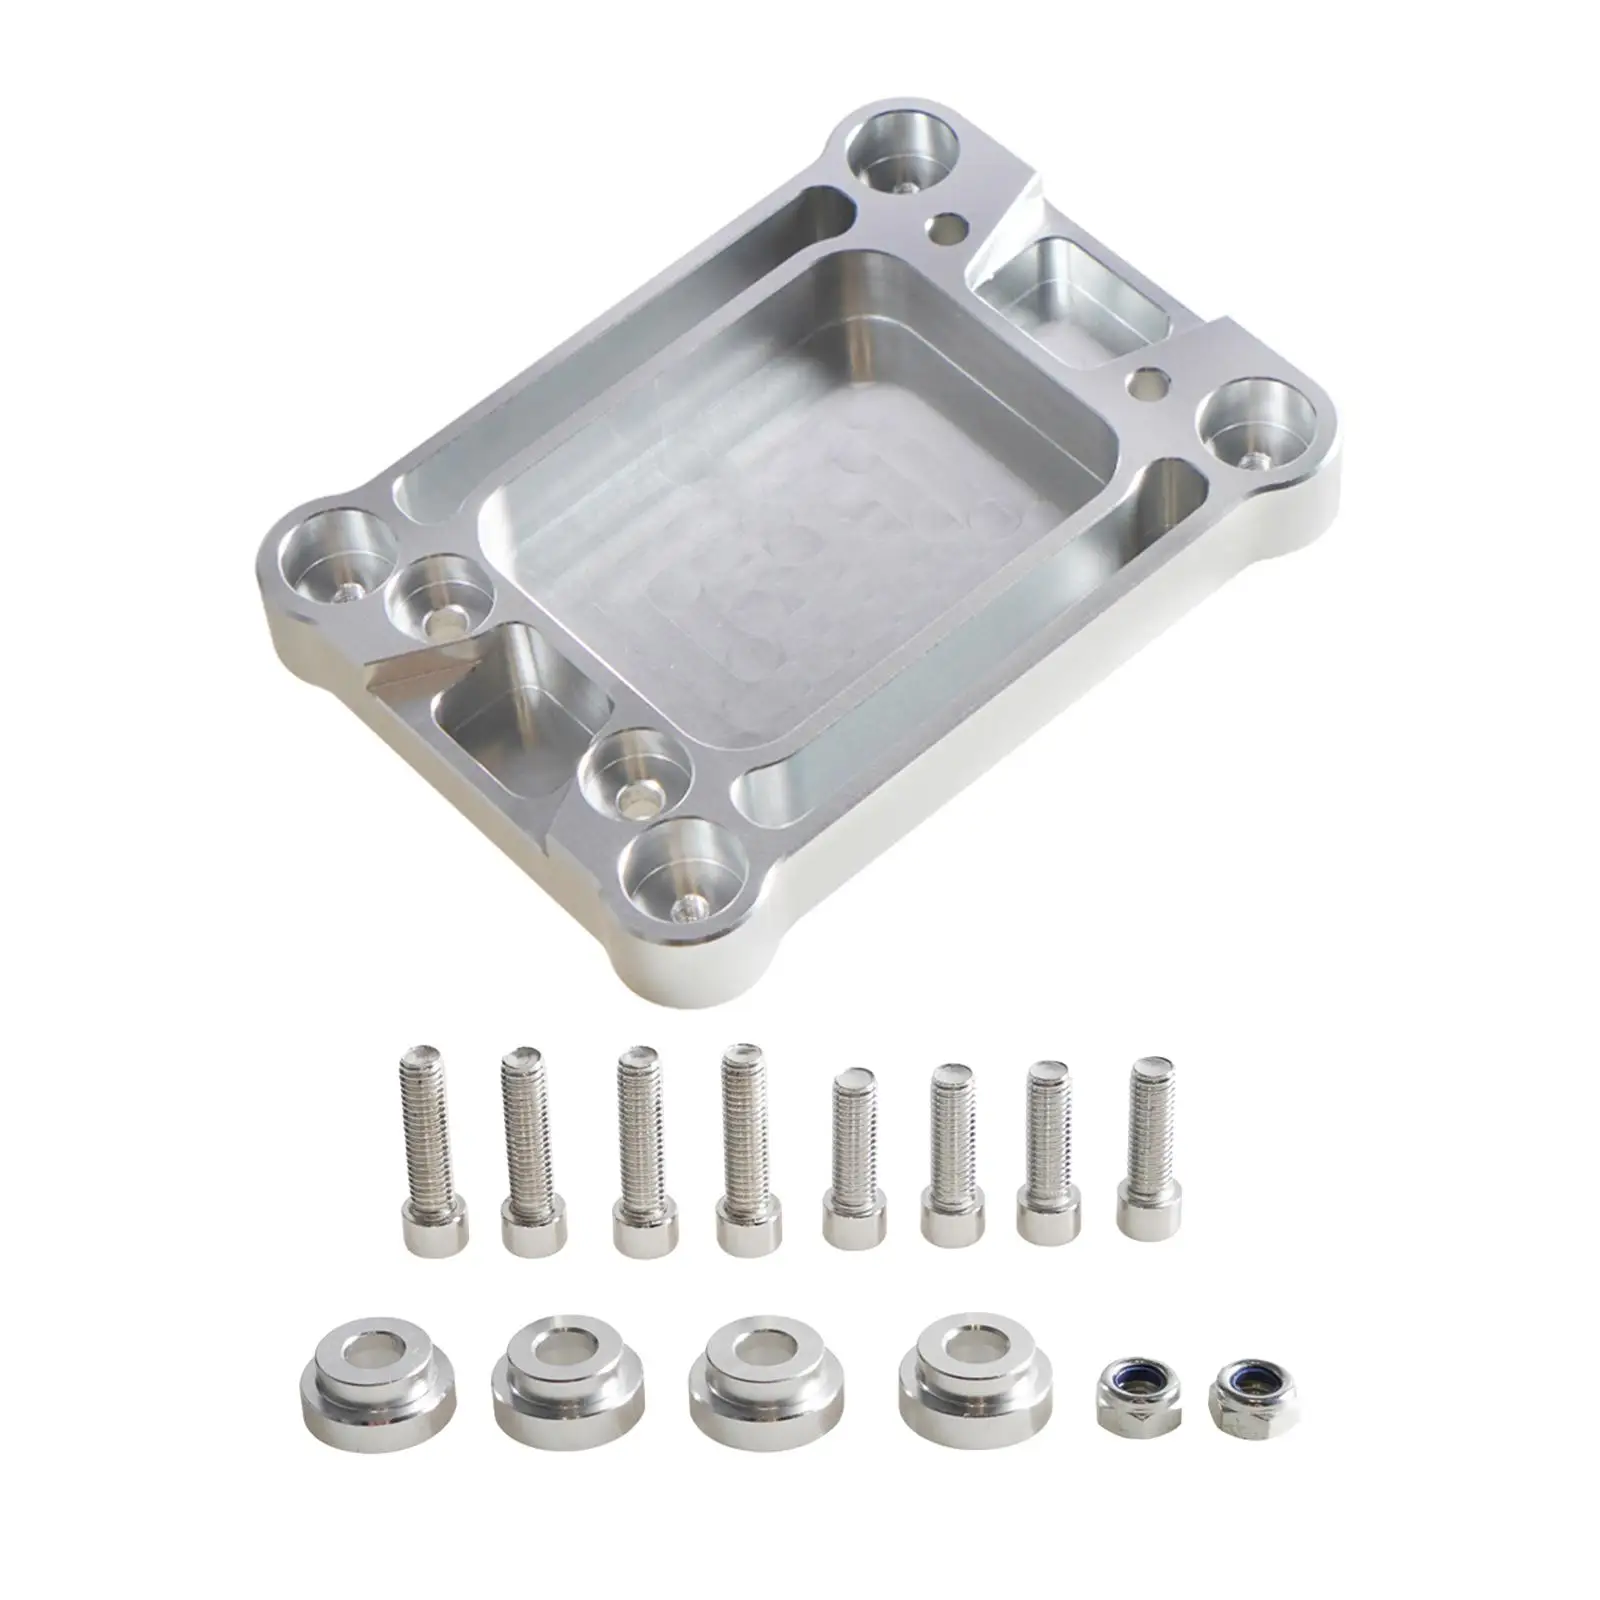 Billet Shifter Box Base Plate professional Parts Shift Lever Base for Acura Integra 1994-2001 Civic 1988-2000